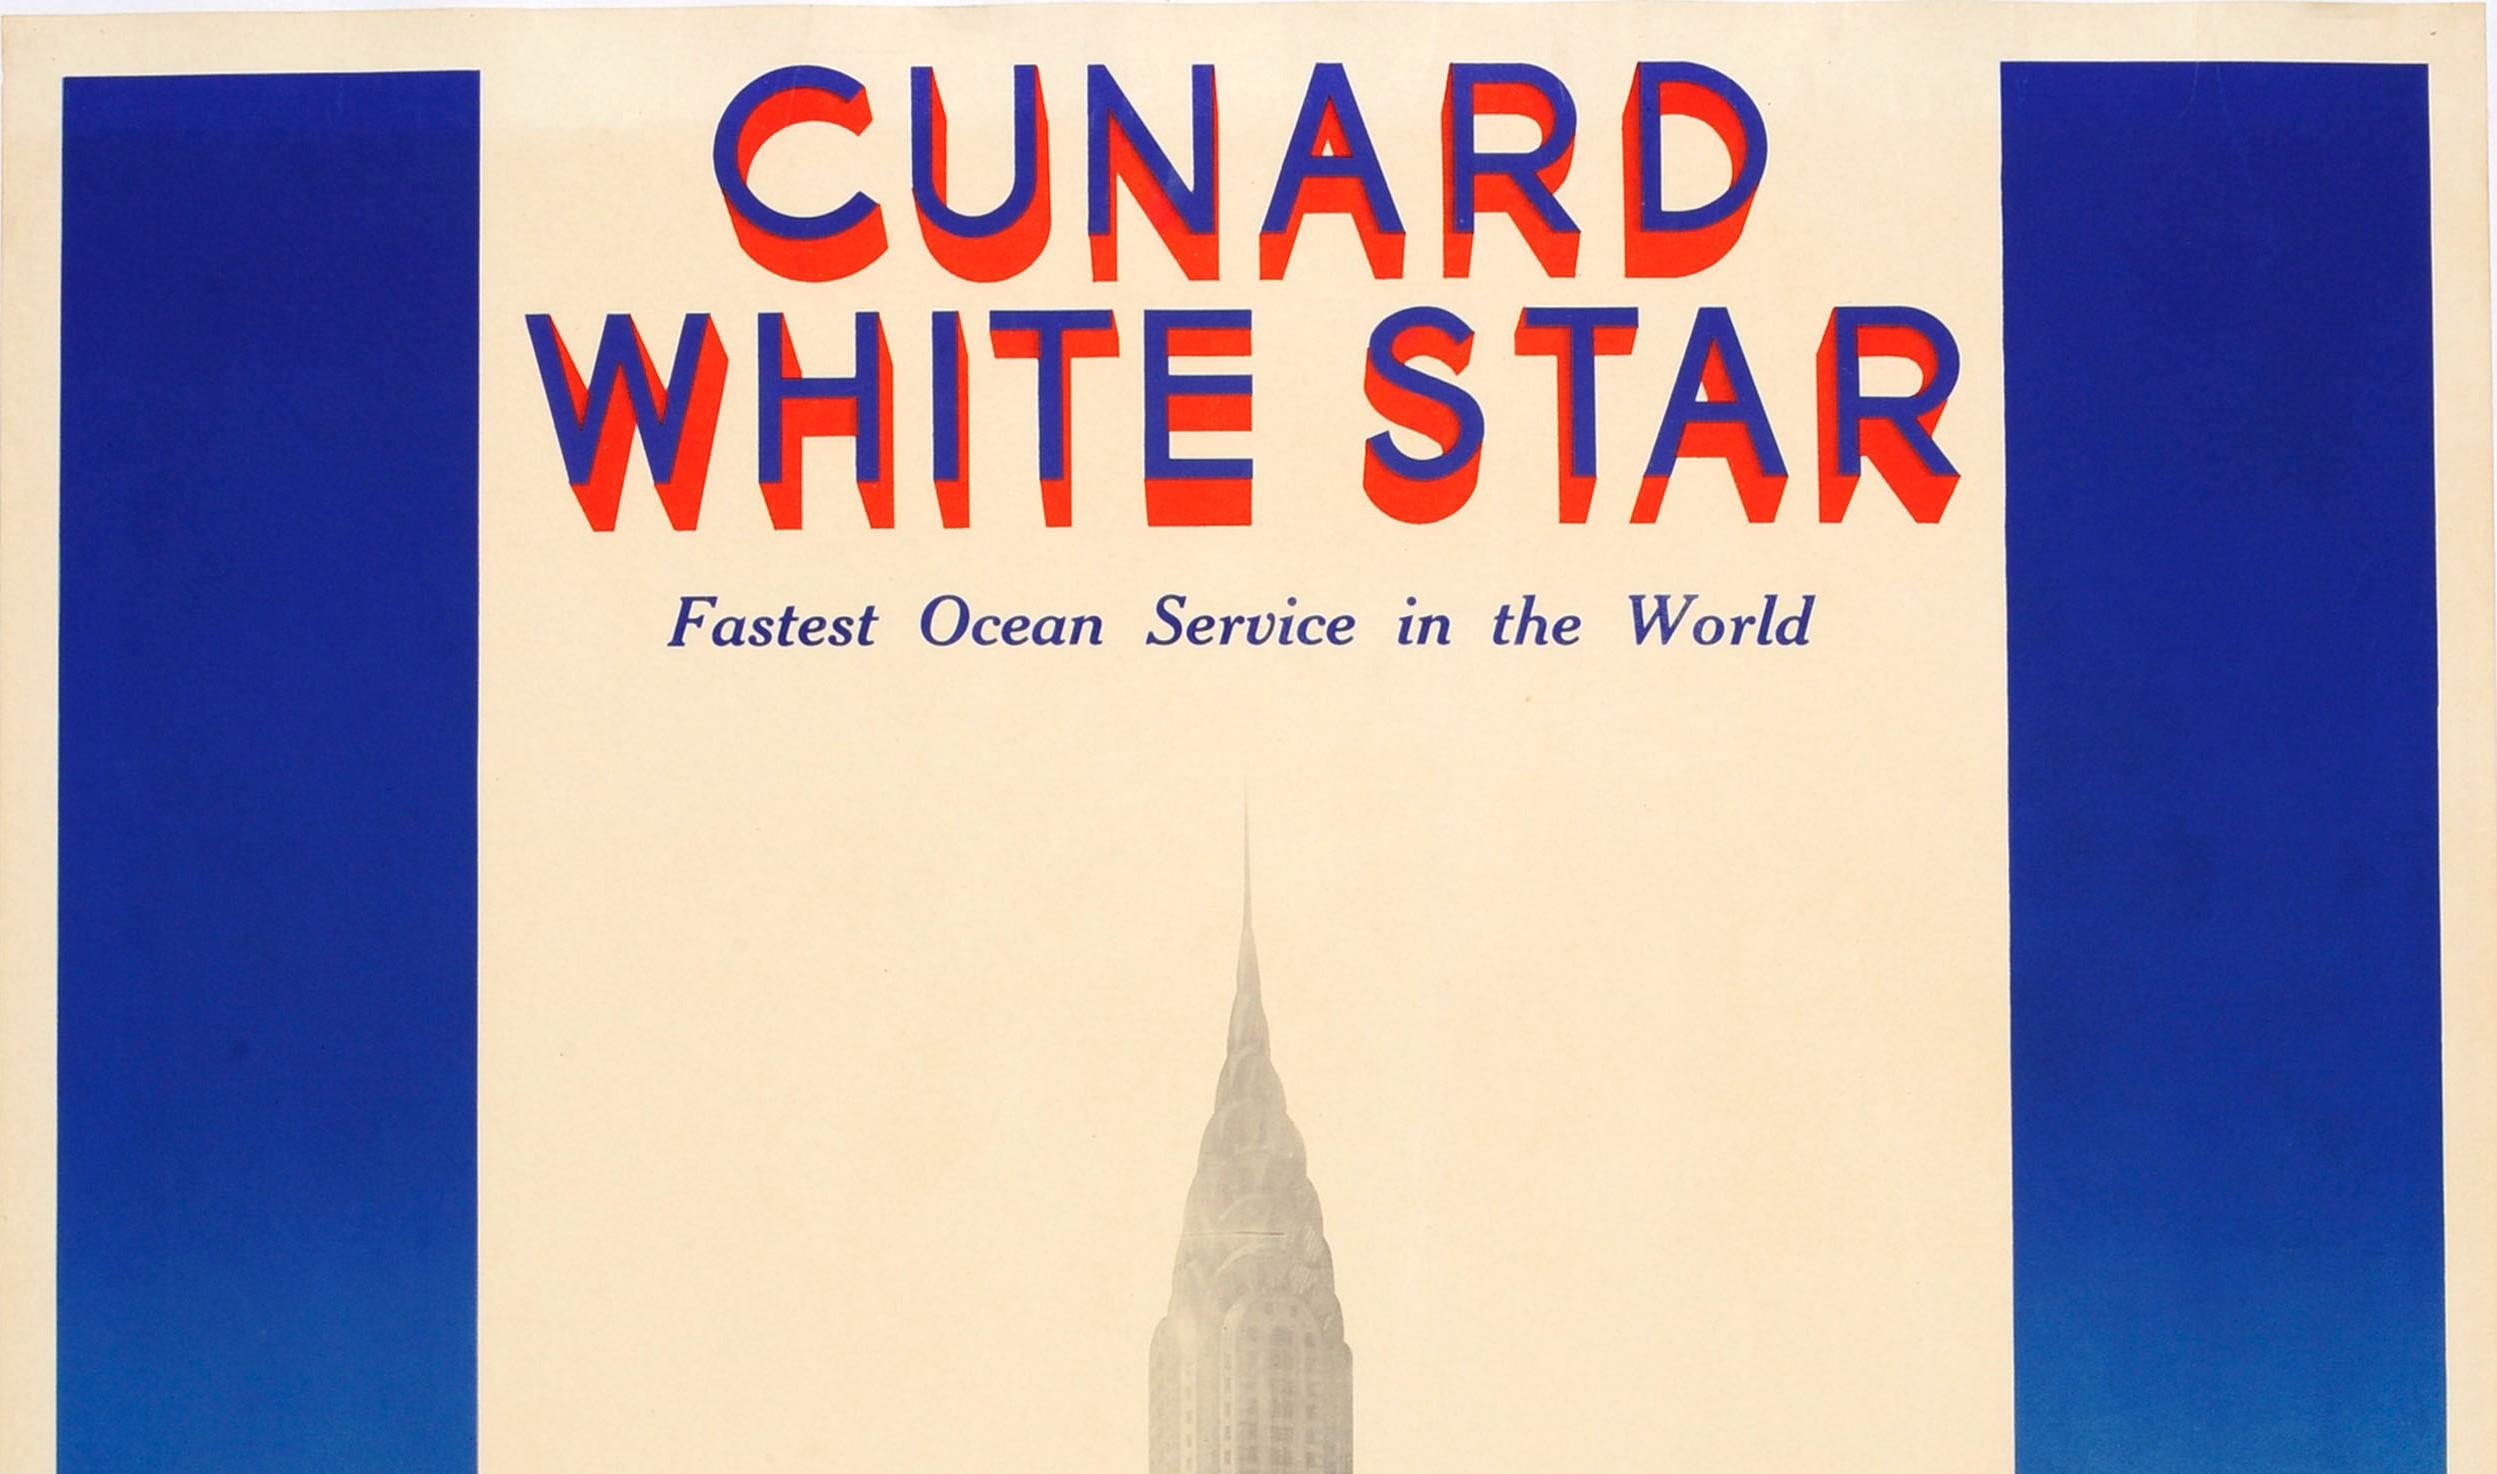 Original Vintage Cunard White Star Ocean Liner Poster Queen Mary Queen Elizabeth - Print by A. Roquin